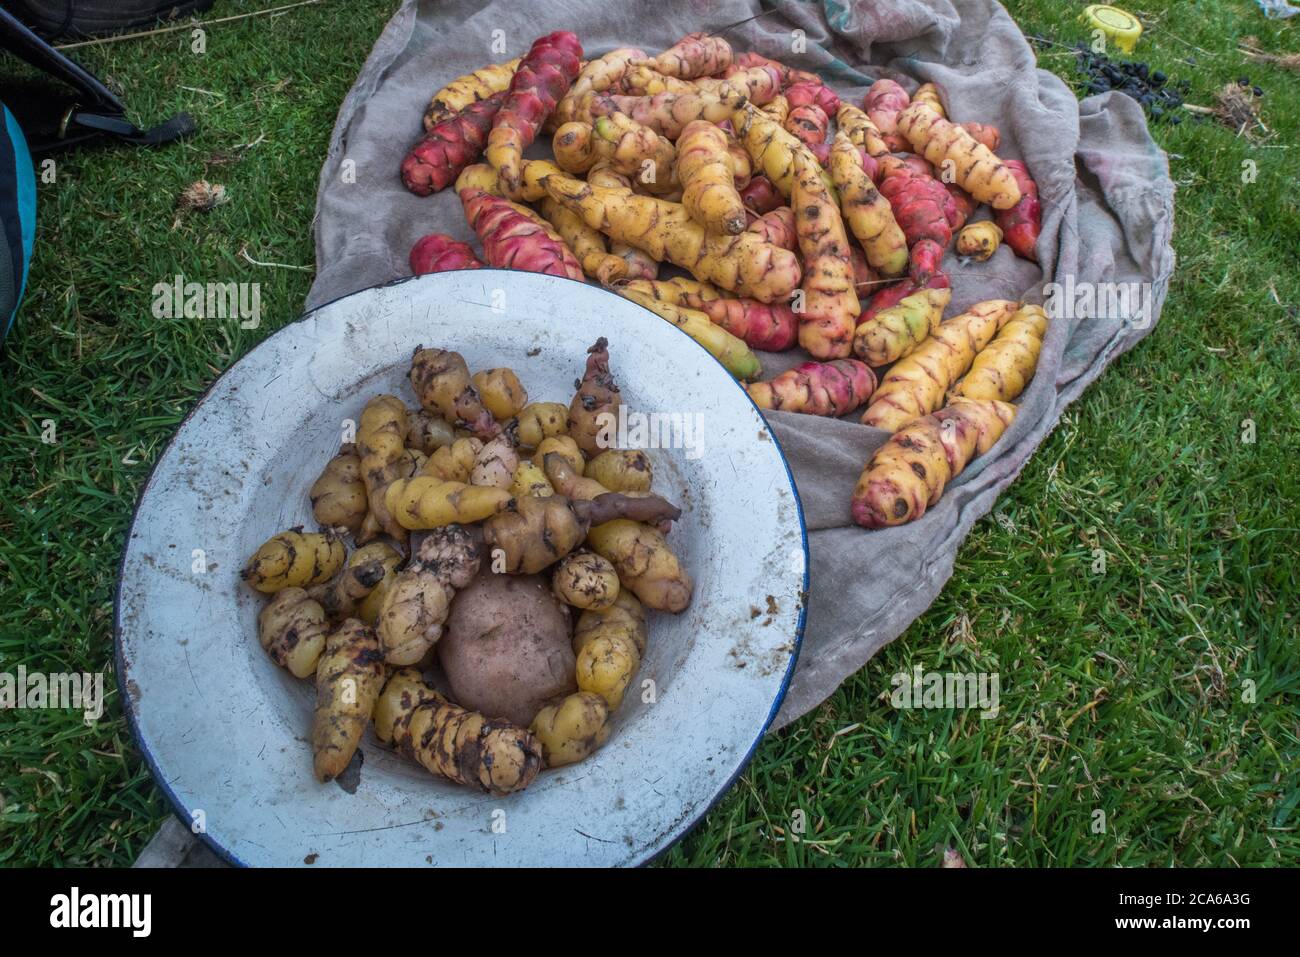 Fresh oca, a type of root vegetable, after being harvested in the Peruvian Andes. Oca has been grown here since pre incan times. Stock Photo